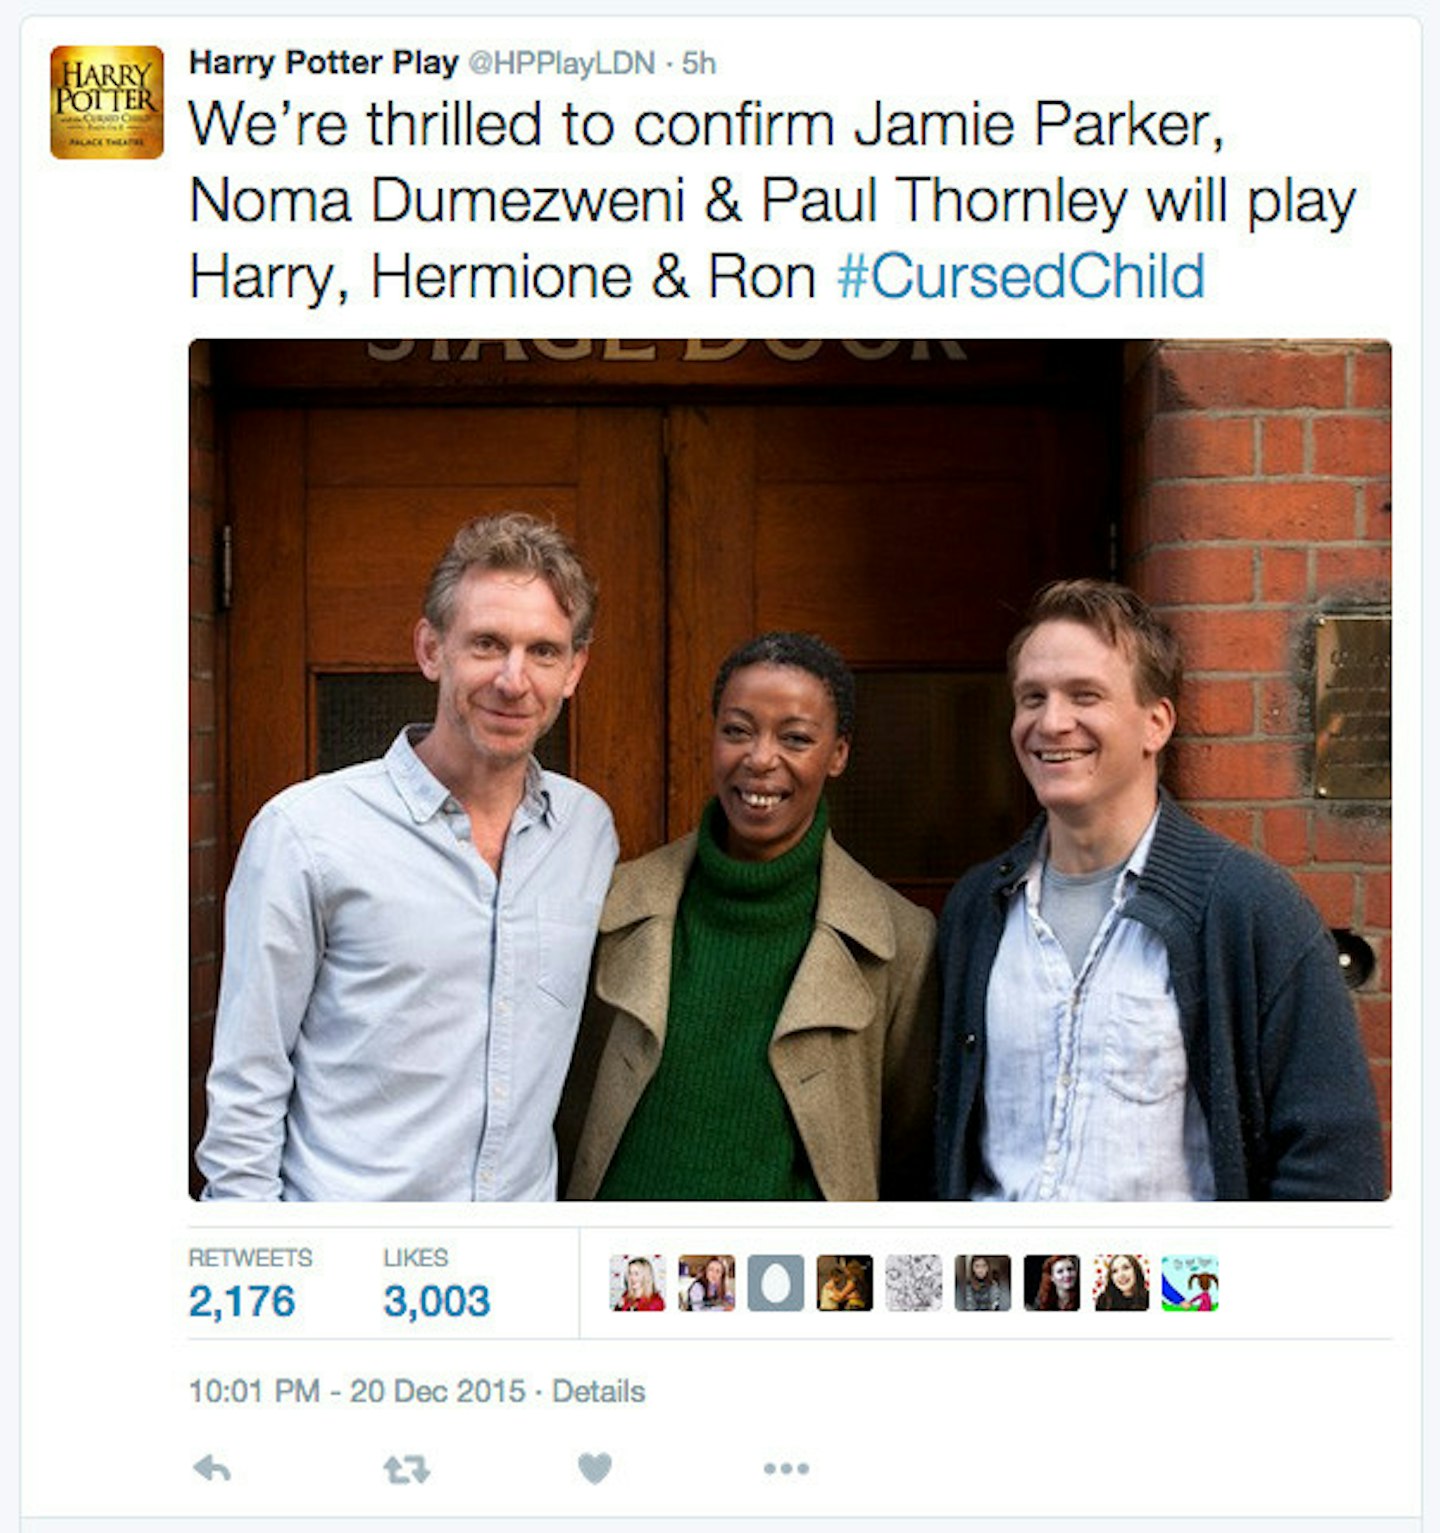 Jamie Parker is set to play Harry, Paul Thornley will play Ron and Noma Dumezweni will play Hermione.